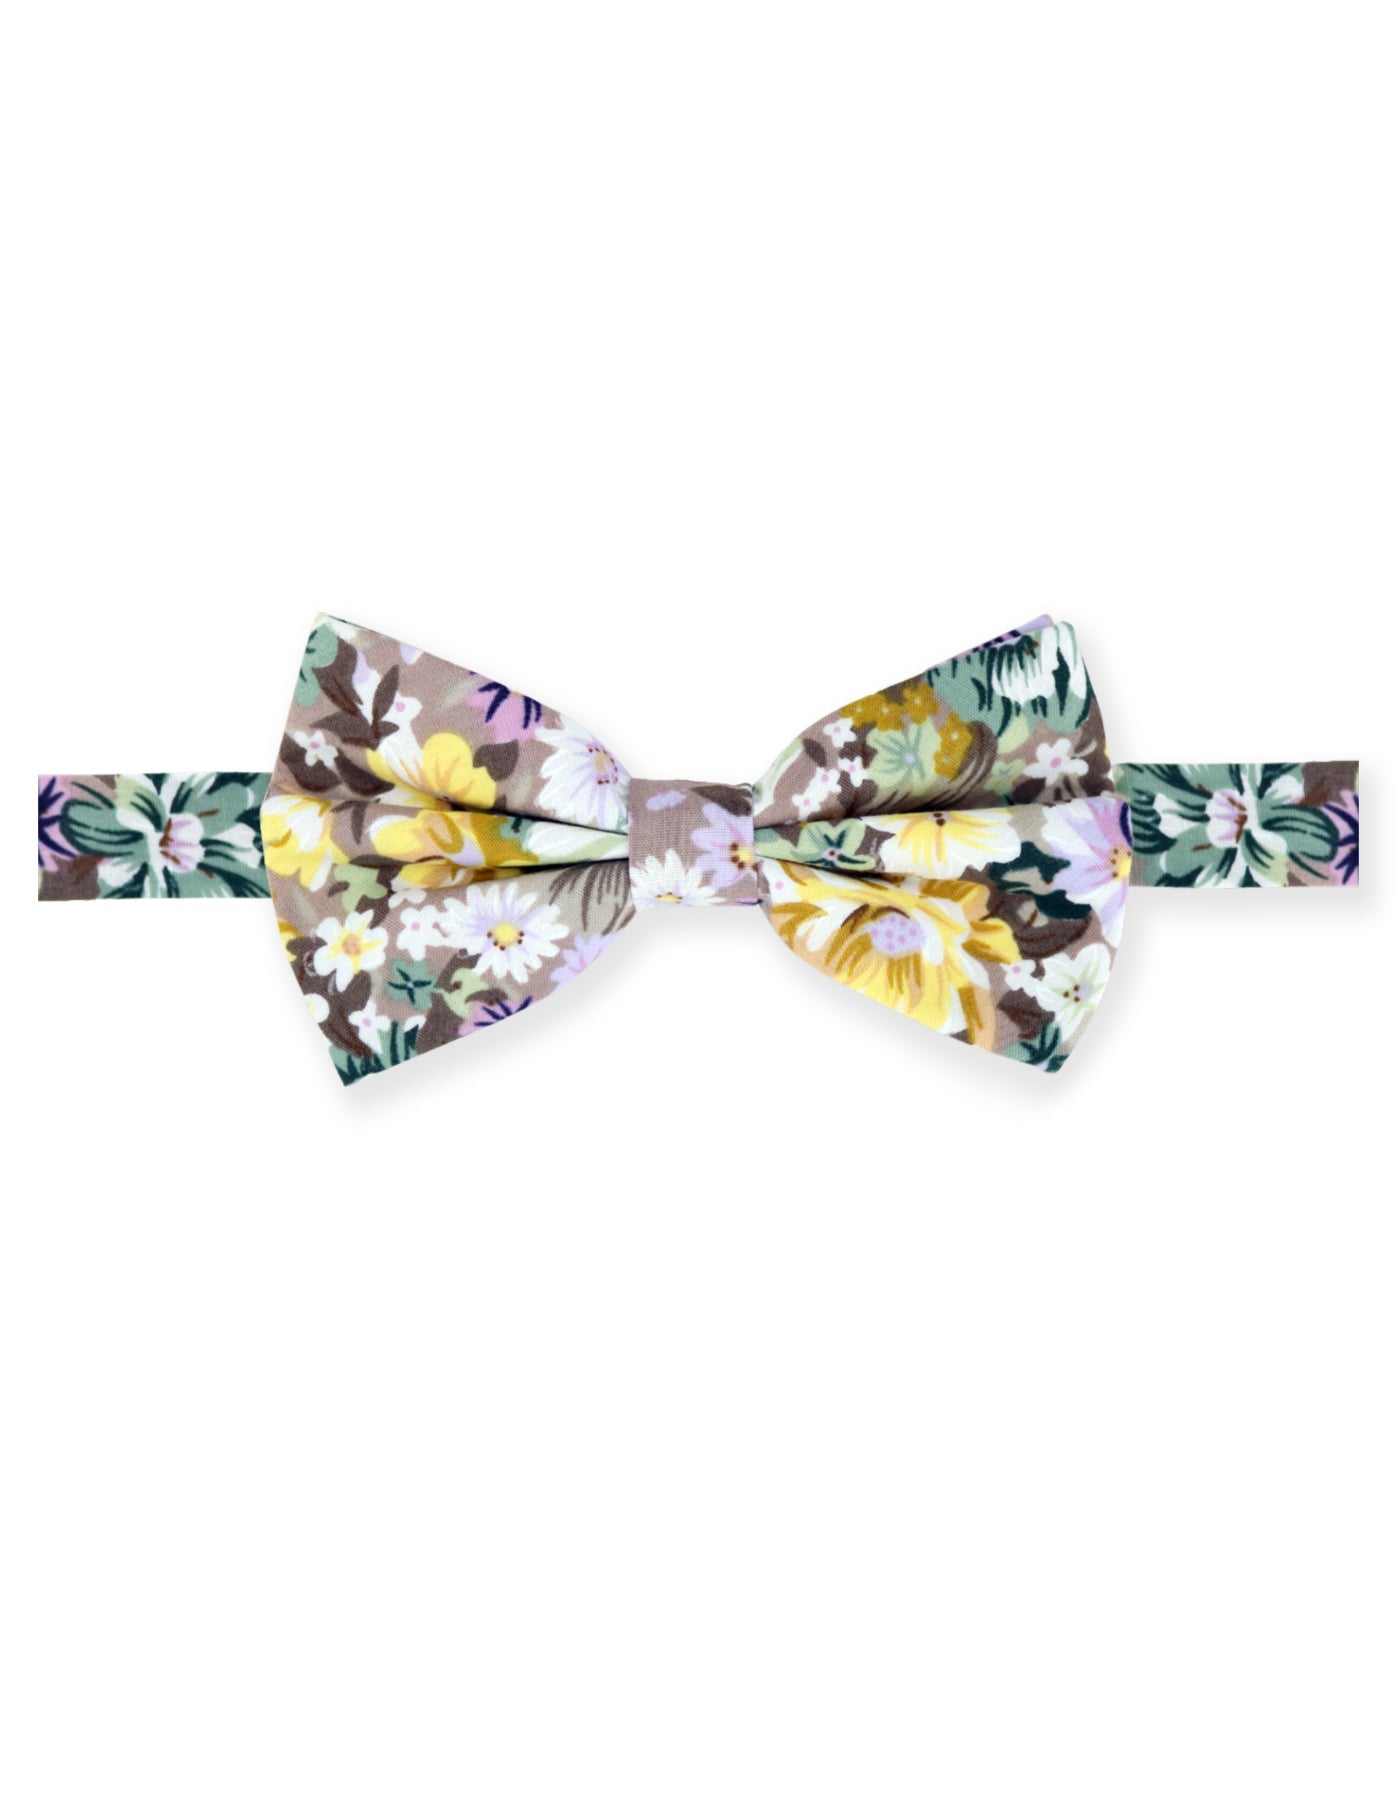 100% Cotton Floral Print Self-Tie Bow Tie - Brown & Yellow